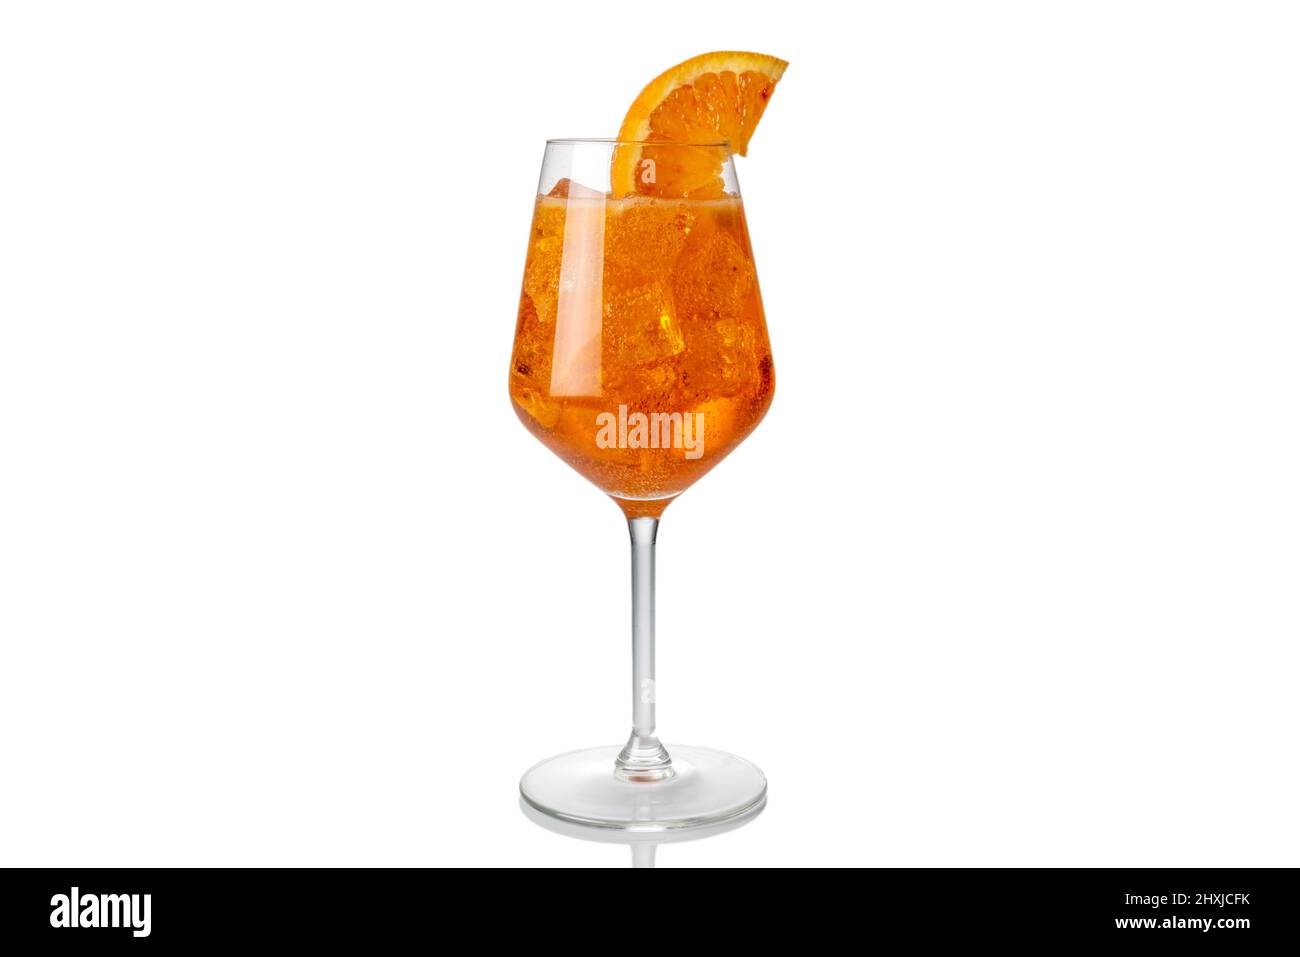 Alcoholic Aperol Spritz Cocktail Isolated on White with Clipping Path Stock Photo